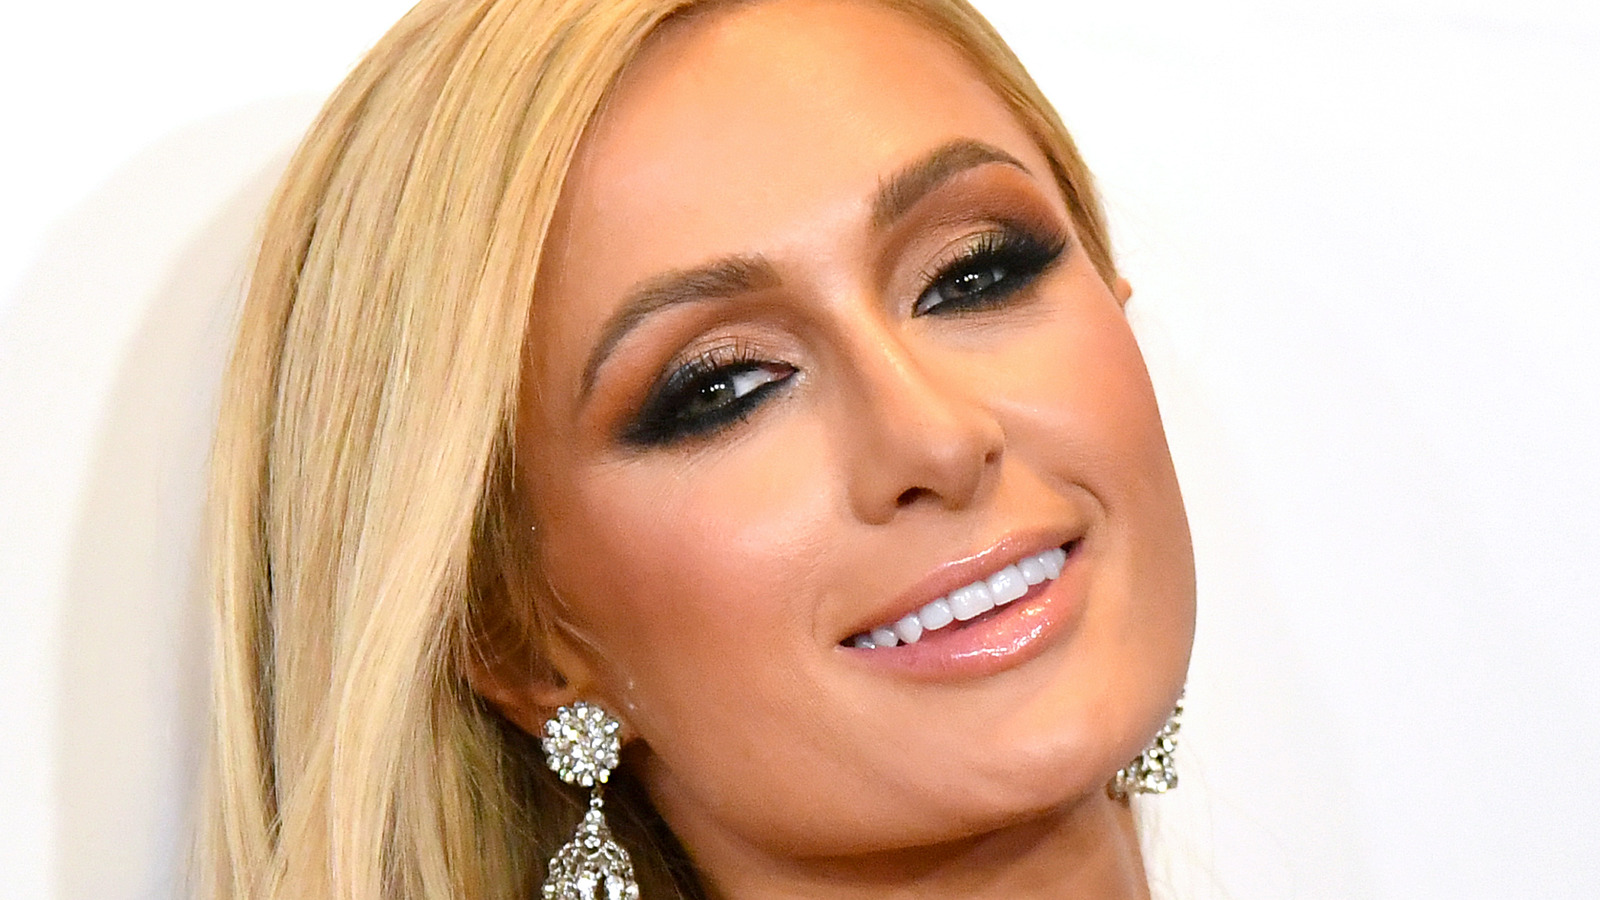 The Paris Hilton Interview That Didn't Age Well